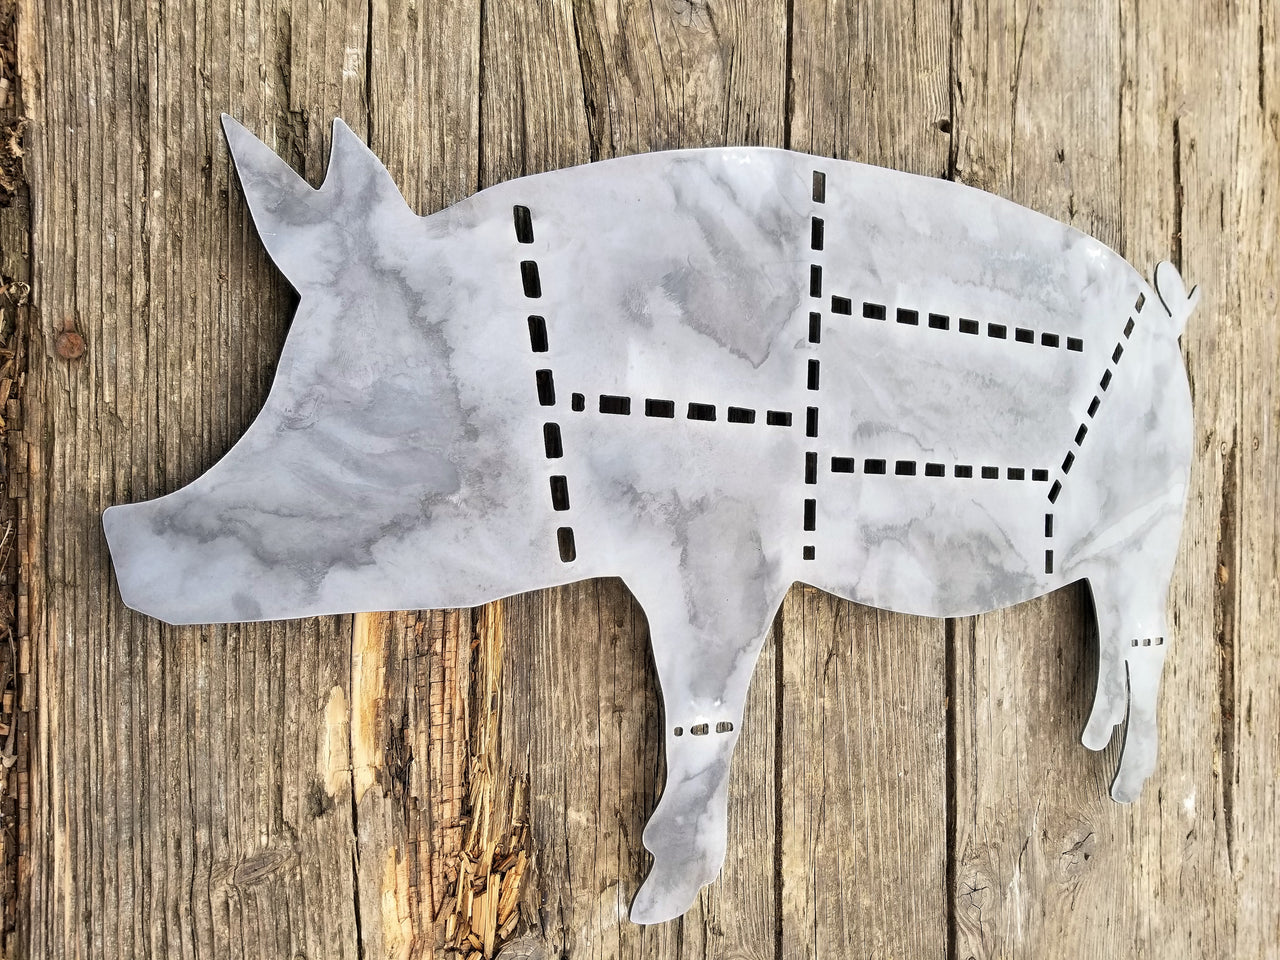 This sign is in the shape of a pig and dotted lines separate the cuts of pork